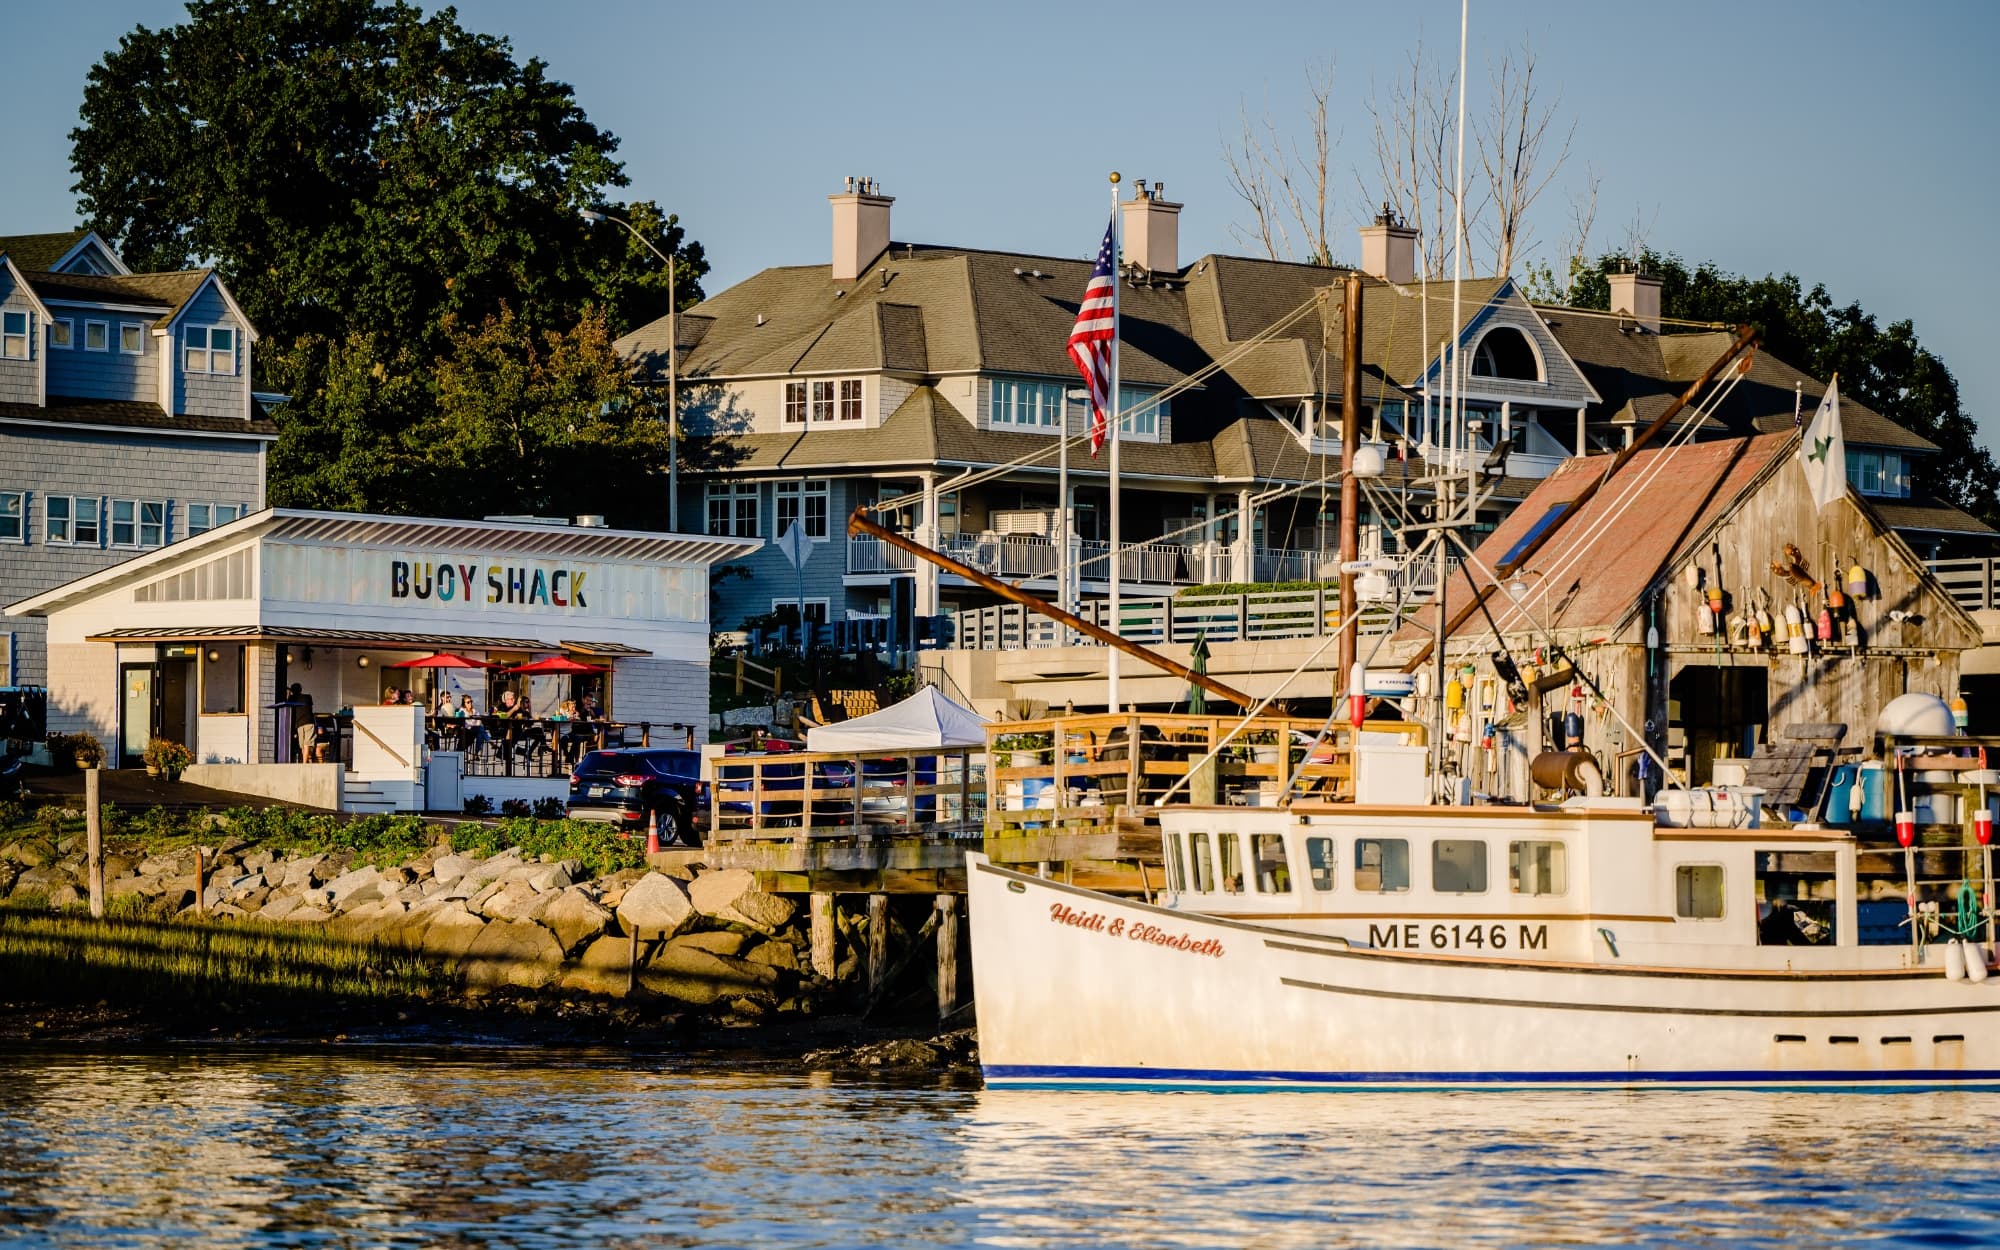 The Rolling Stone fishing boat docked in front of the Buoy Shack ocean restaurant and lobster shack.